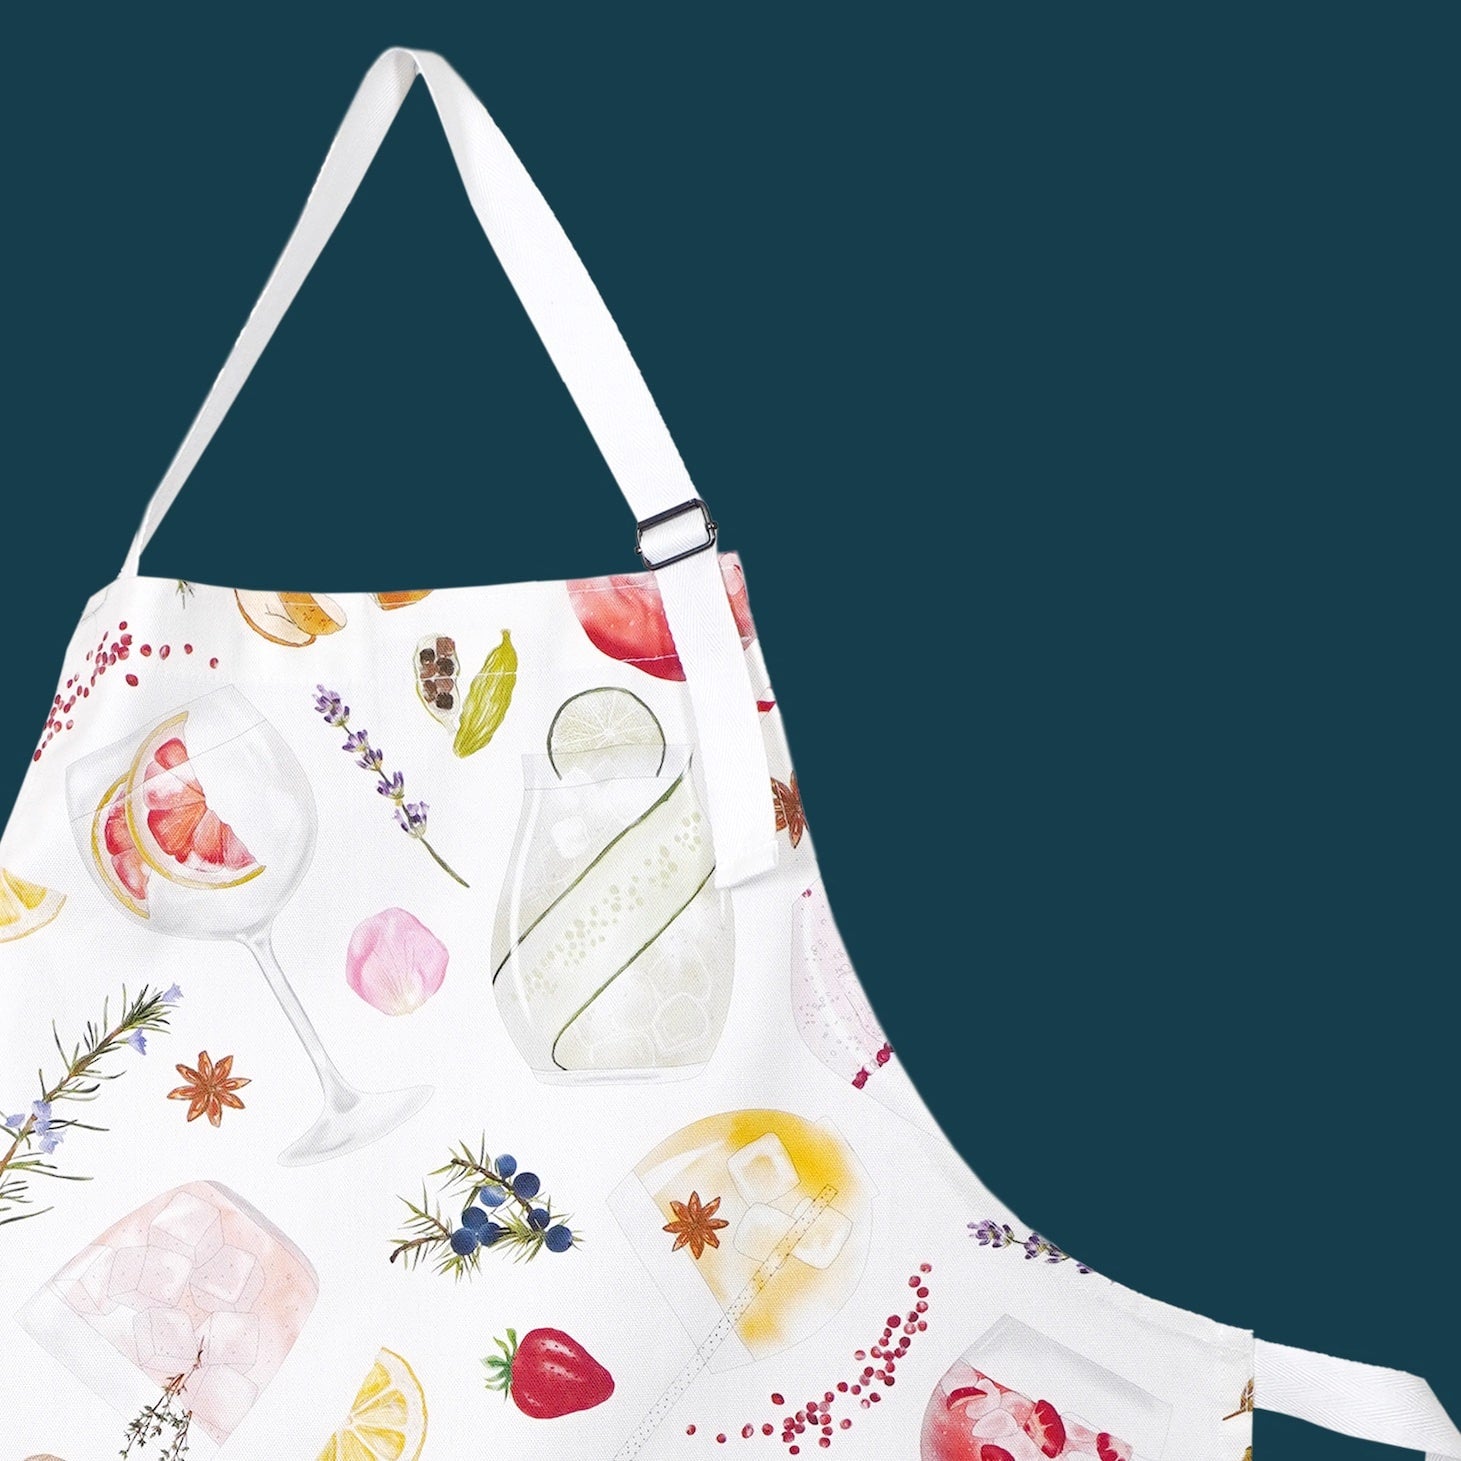 Gin Apron an Ideal Gin Gift for her